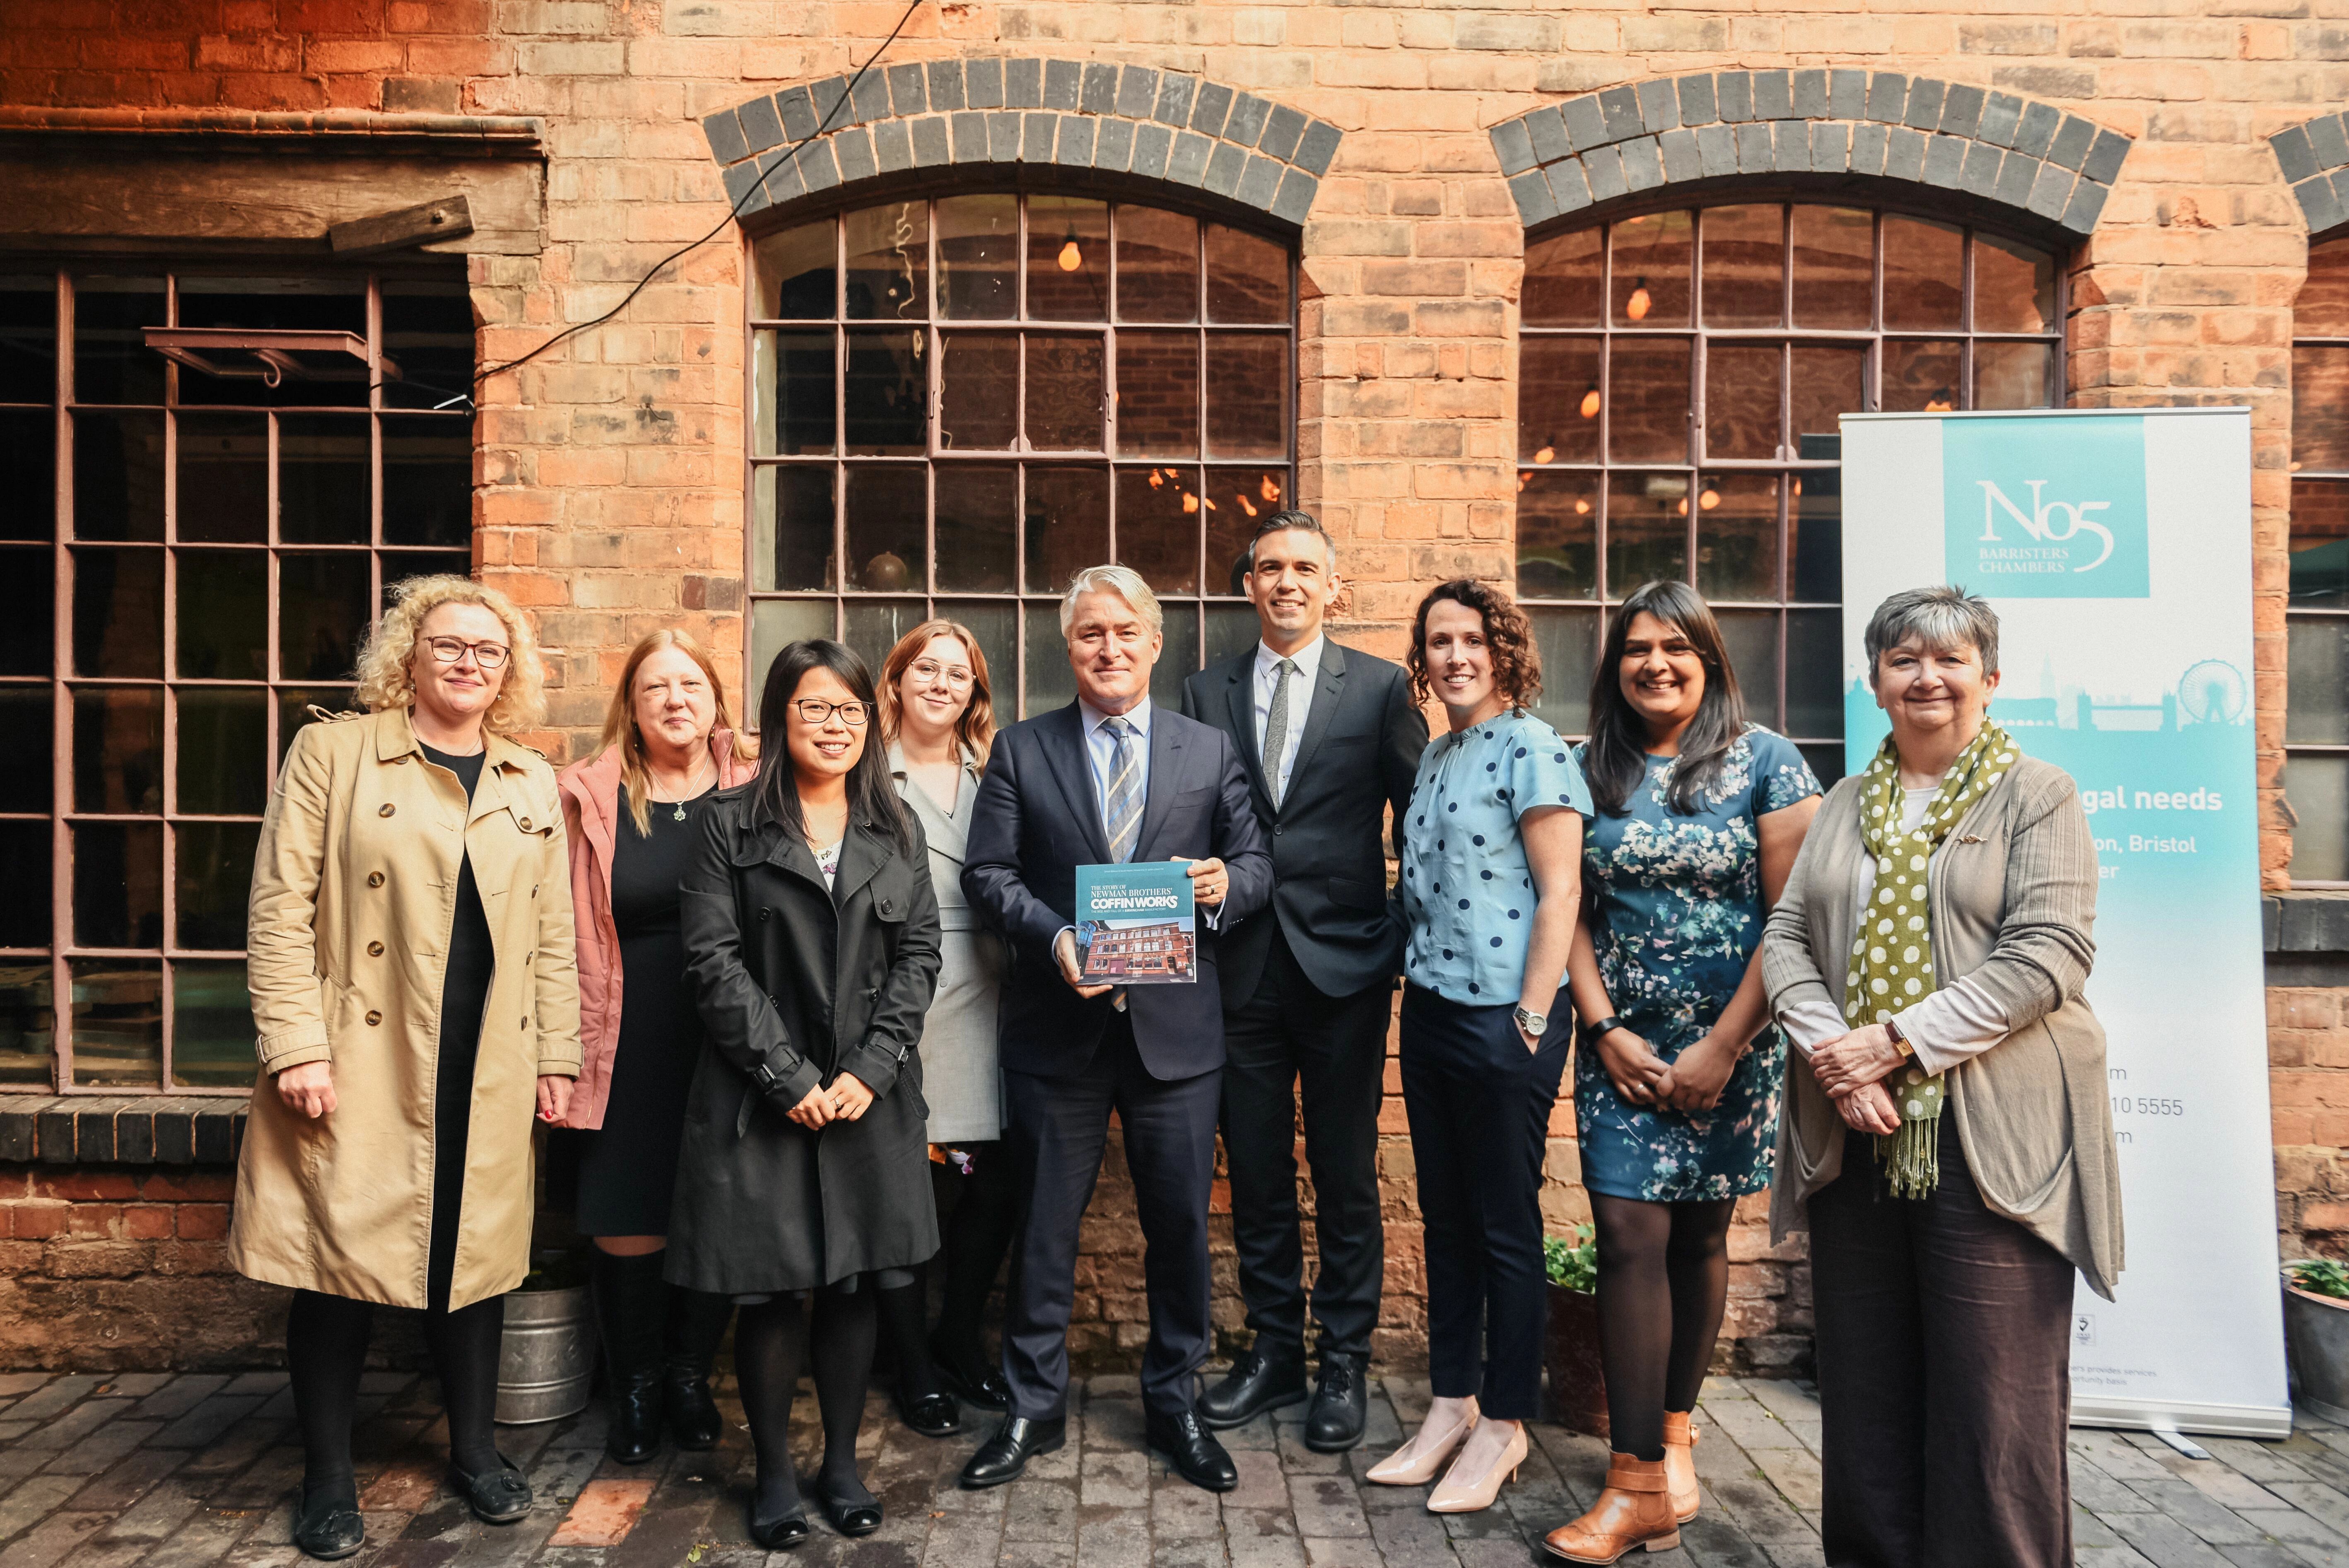 Sponsors, staff and guests at the launch of the guidebook at the Coffin Works